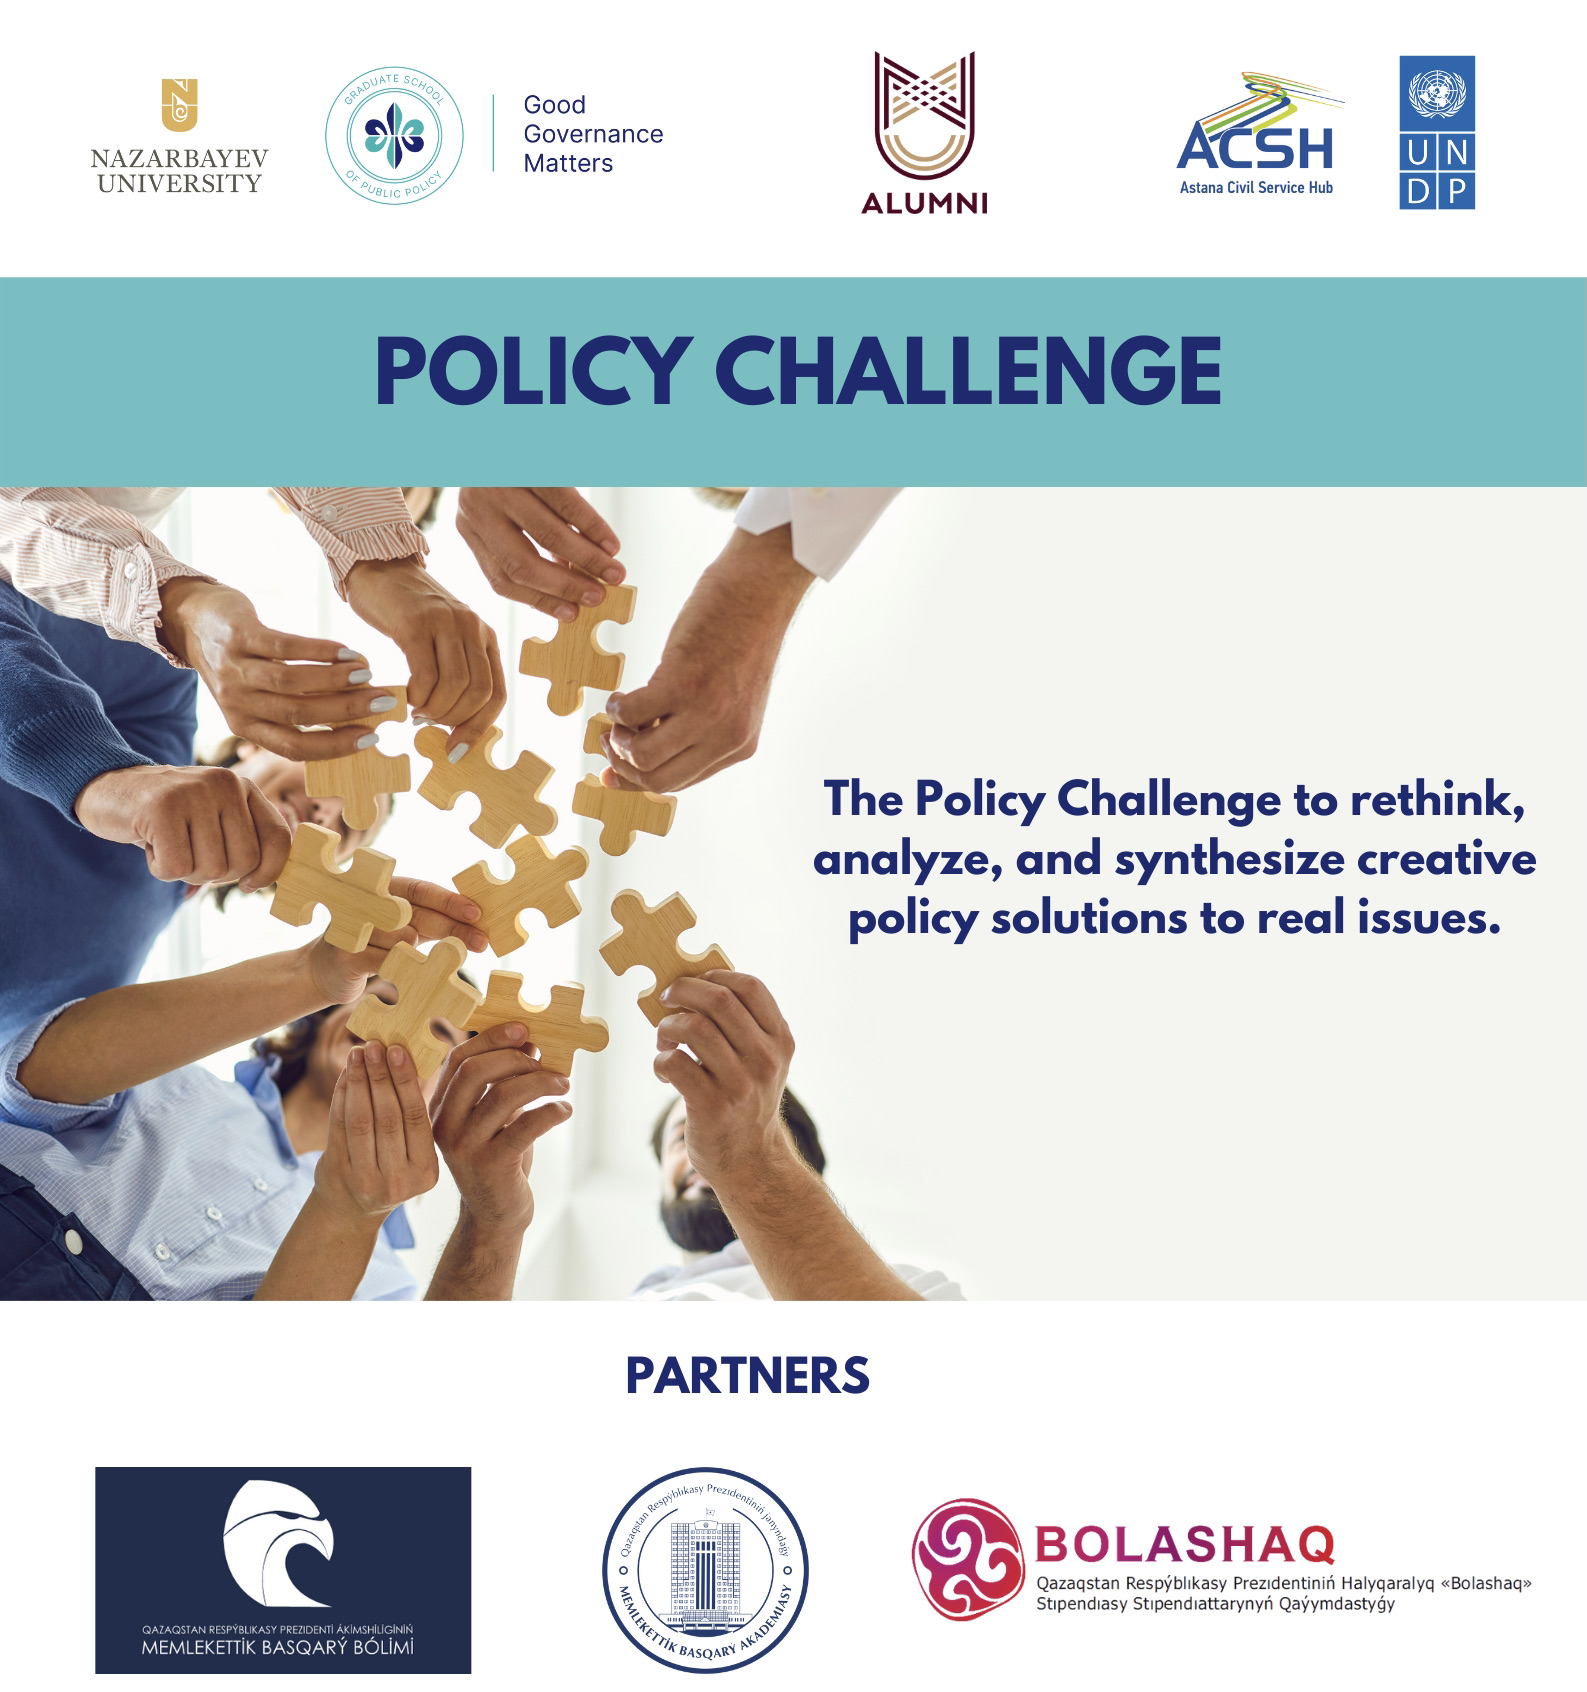 Policy Challenge 2022 was held